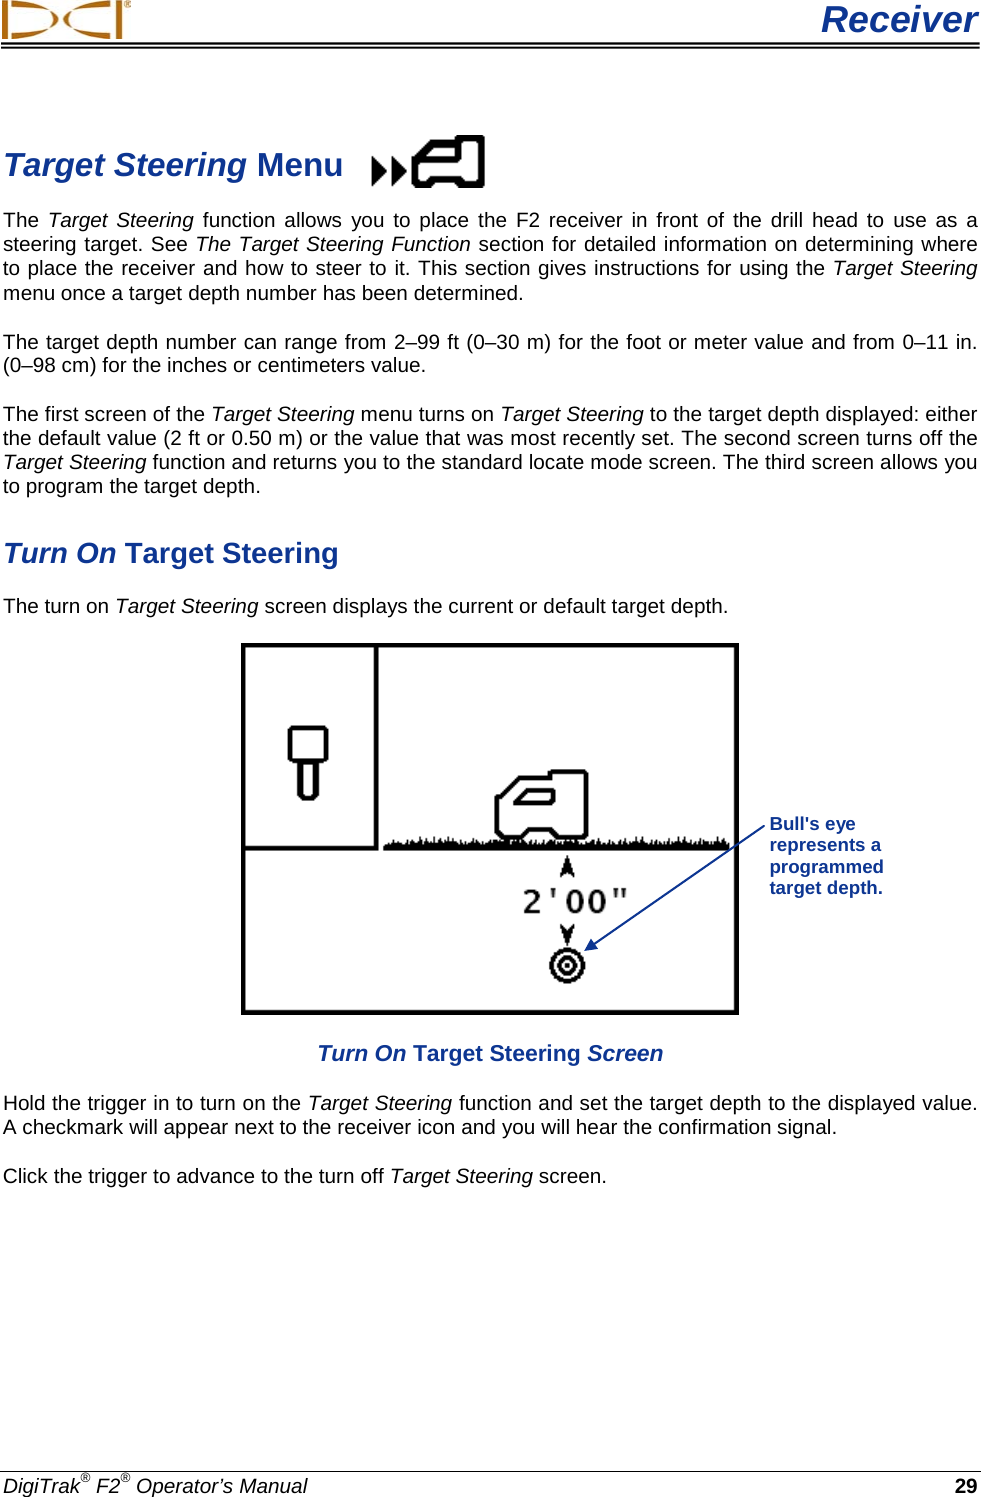  Receiver DigiTrak® F2® Operator’s Manual 29 Target Steering Menu The Target Steering  function allows you to place the F2 receiver in front of the drill  head to use as a steering target. See The Target Steering Function section for detailed information on determining where to place the receiver and how to steer to it. This section gives instructions for using the Target Steering menu once a target depth number has been determined.  The target depth number can range from 2–99 ft (0–30 m) for the foot or meter value and from 0–11 in. (0–98 cm) for the inches or centimeters value.  The first screen of the Target Steering menu turns on Target Steering to the target depth displayed: either the default value (2 ft or 0.50 m) or the value that was most recently set. The second screen turns off the Target Steering function and returns you to the standard locate mode screen. The third screen allows you to program the target depth.  Turn On Target Steering The turn on Target Steering screen displays the current or default target depth.   Turn On Target Steering Screen Hold the trigger in to turn on the Target Steering function and set the target depth to the displayed value. A checkmark will appear next to the receiver icon and you will hear the confirmation signal.  Click the trigger to advance to the turn off Target Steering screen. Bull&apos;s eye represents a programmed target depth. 